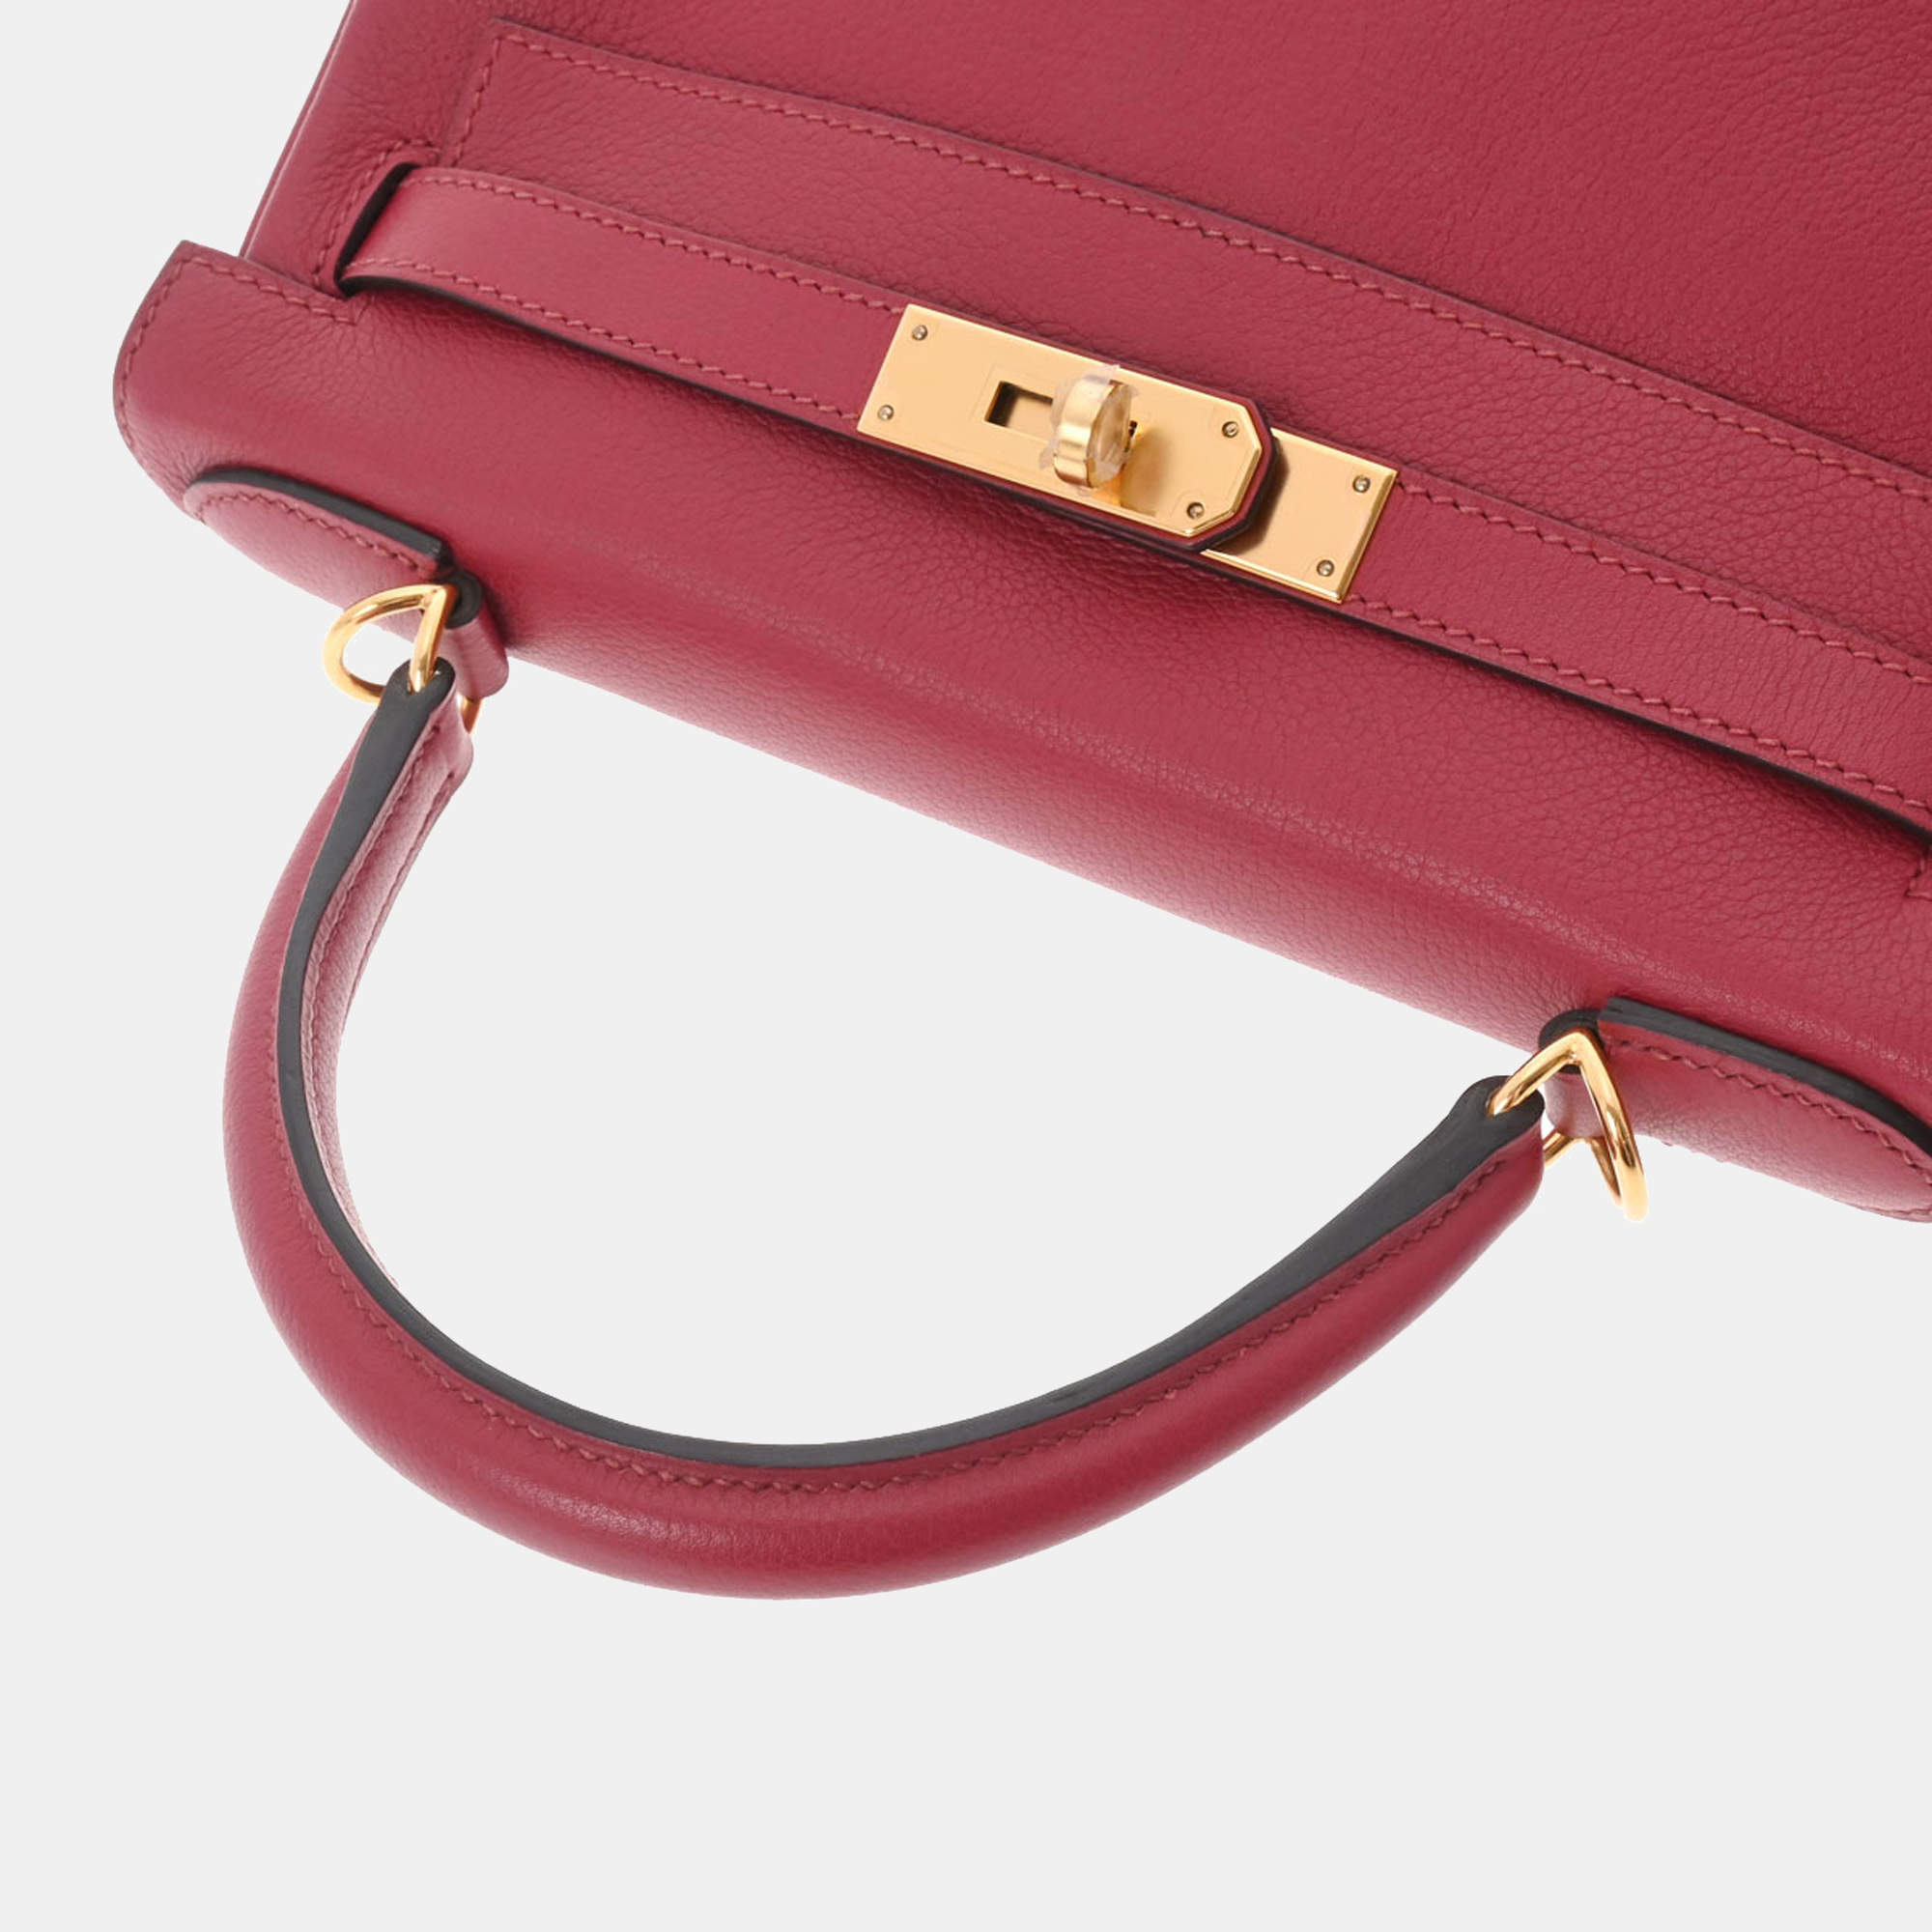 Hermès - Authenticated Kelly 28 Handbag - Lizard Red Plain for Women, Very Good Condition